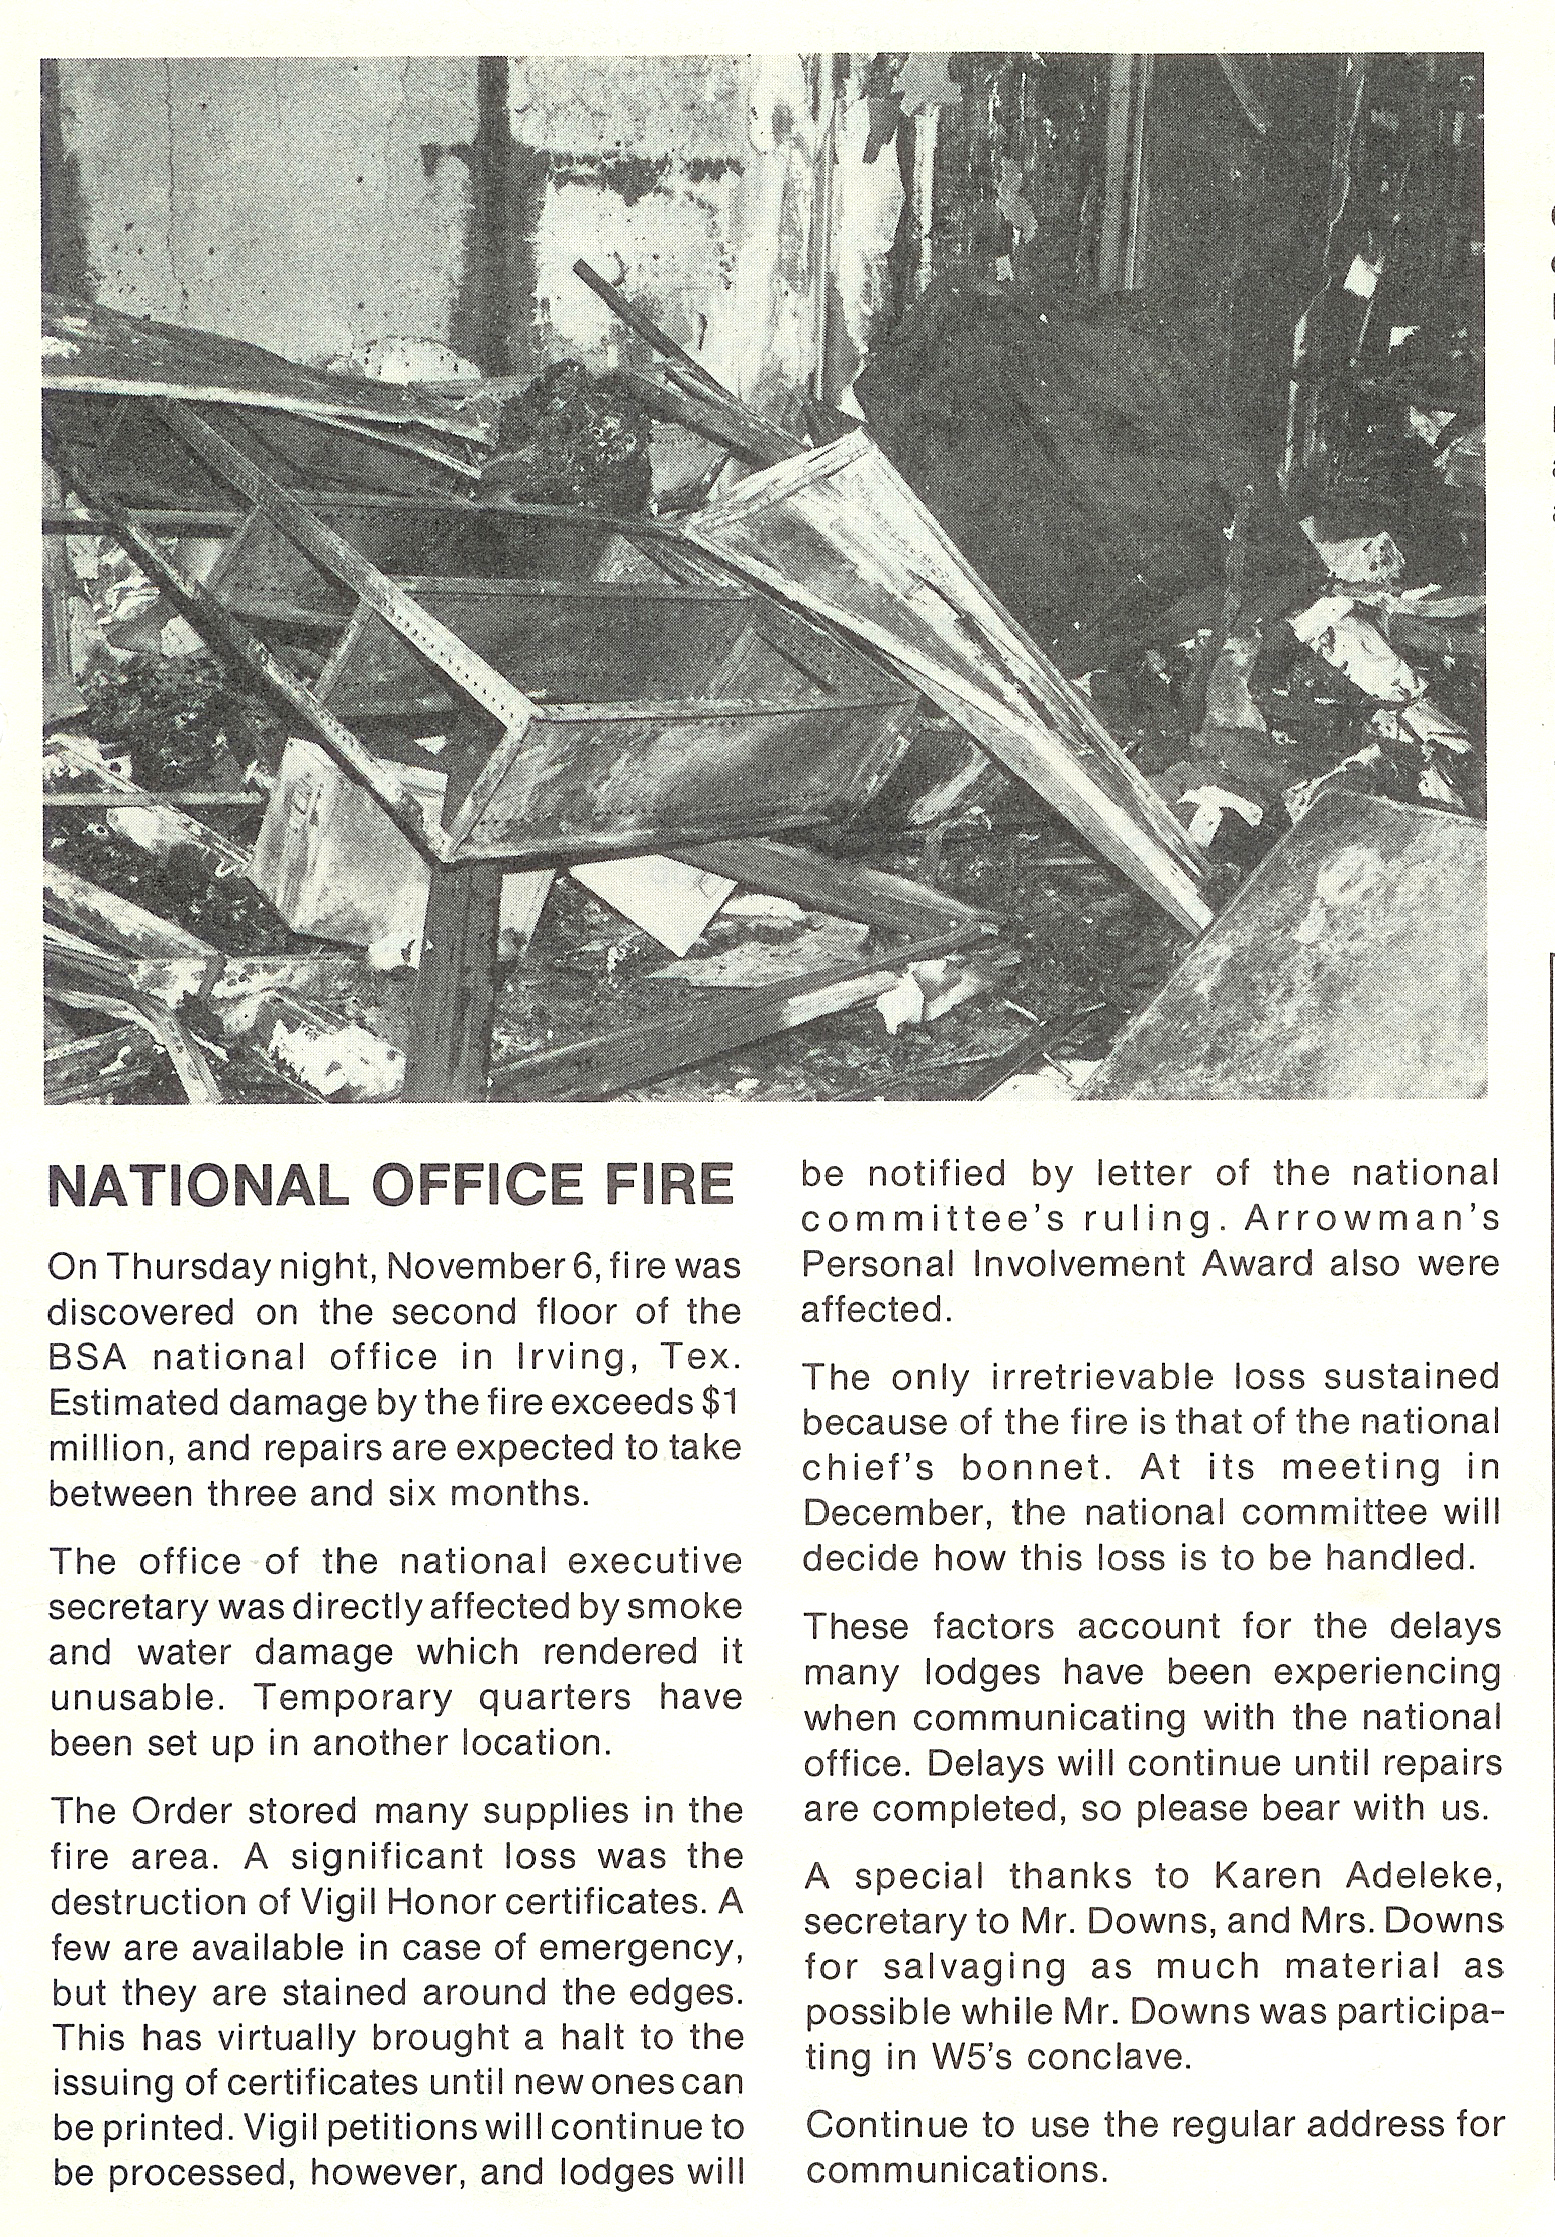 News article of National Office fire